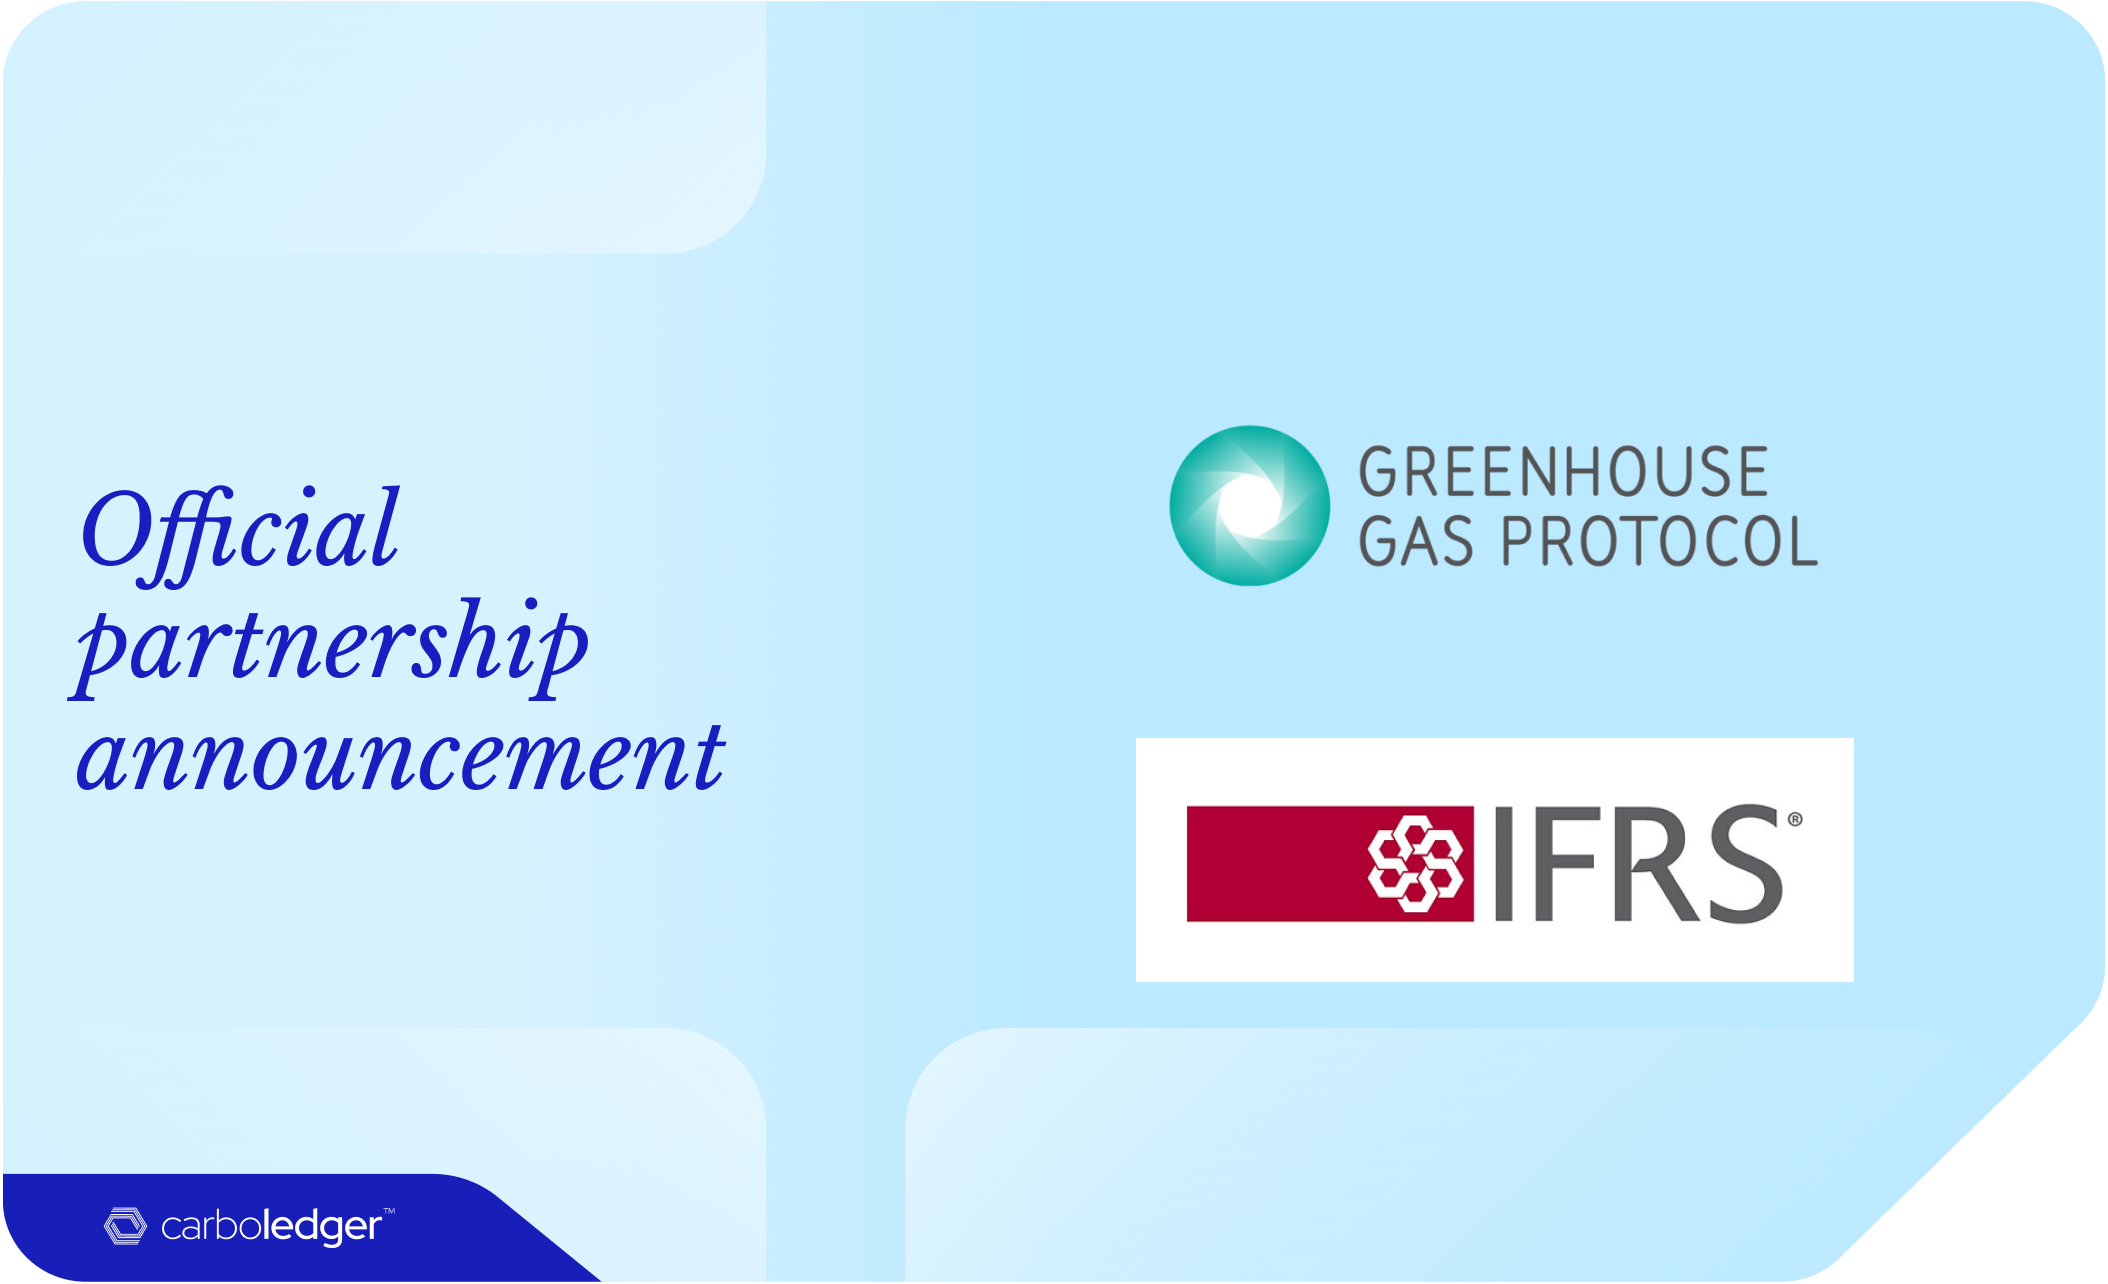 Aligning for Impact: IFRS and GHG Protocol Announces Partnership